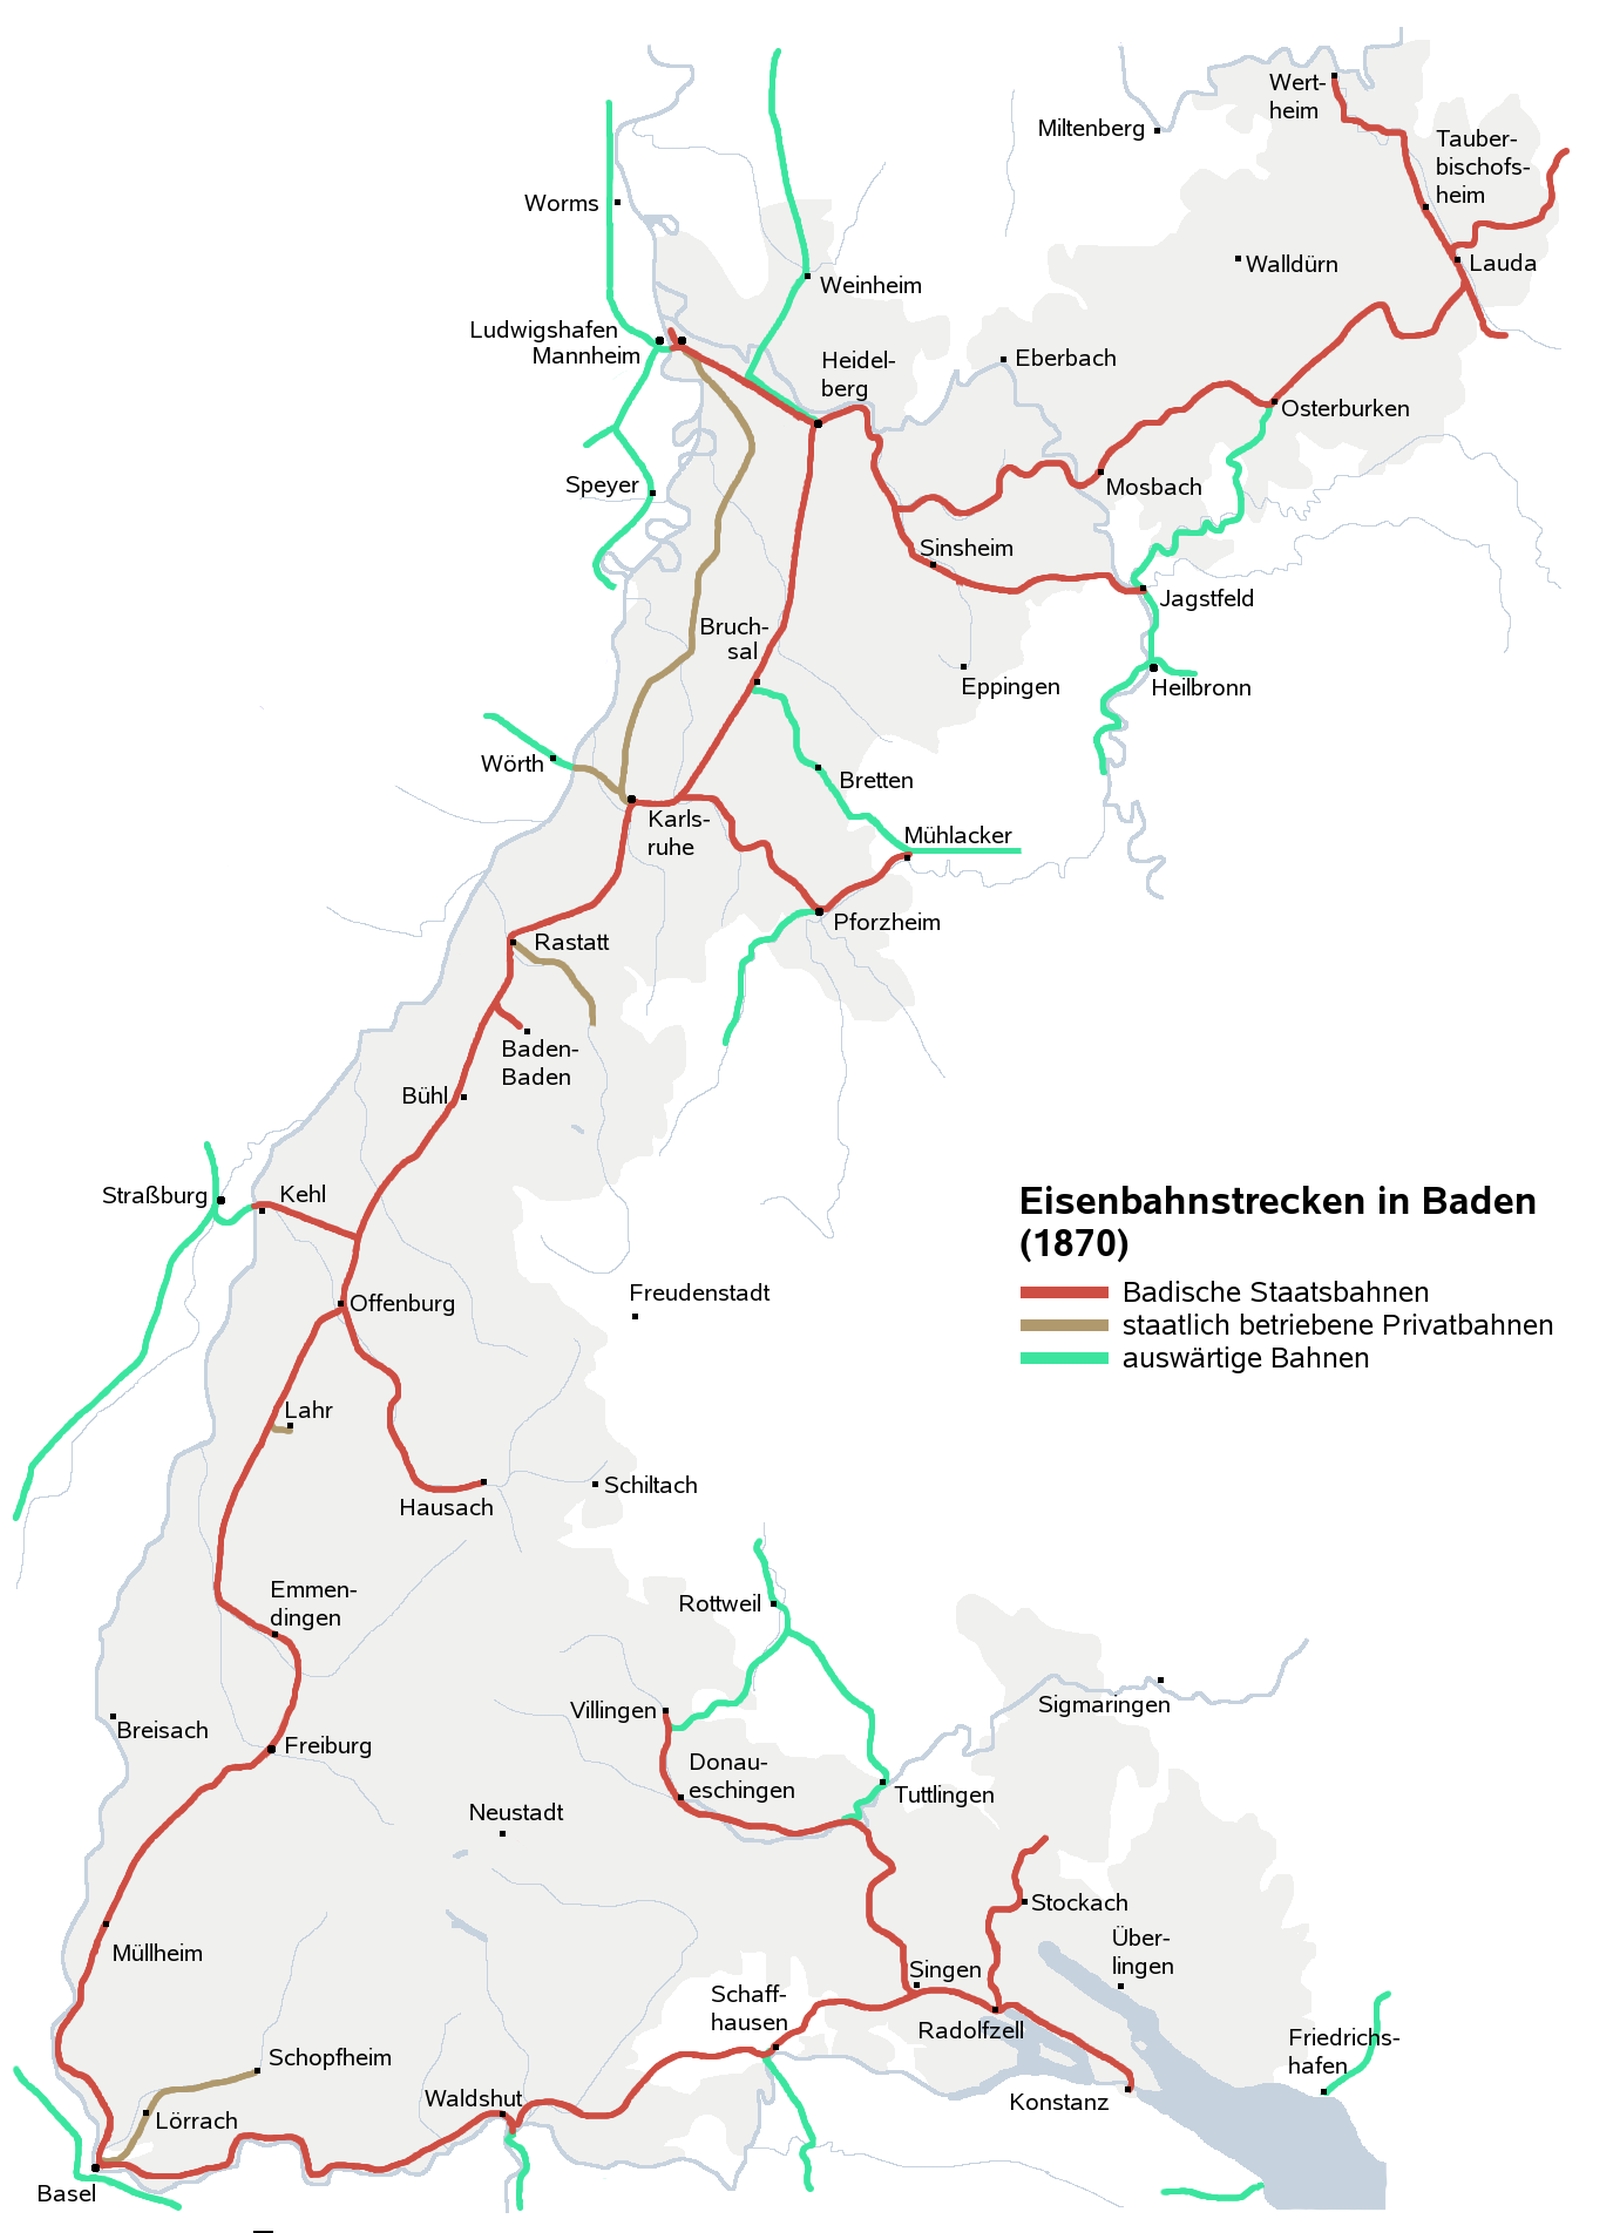 Extent of the Baden network in 1870